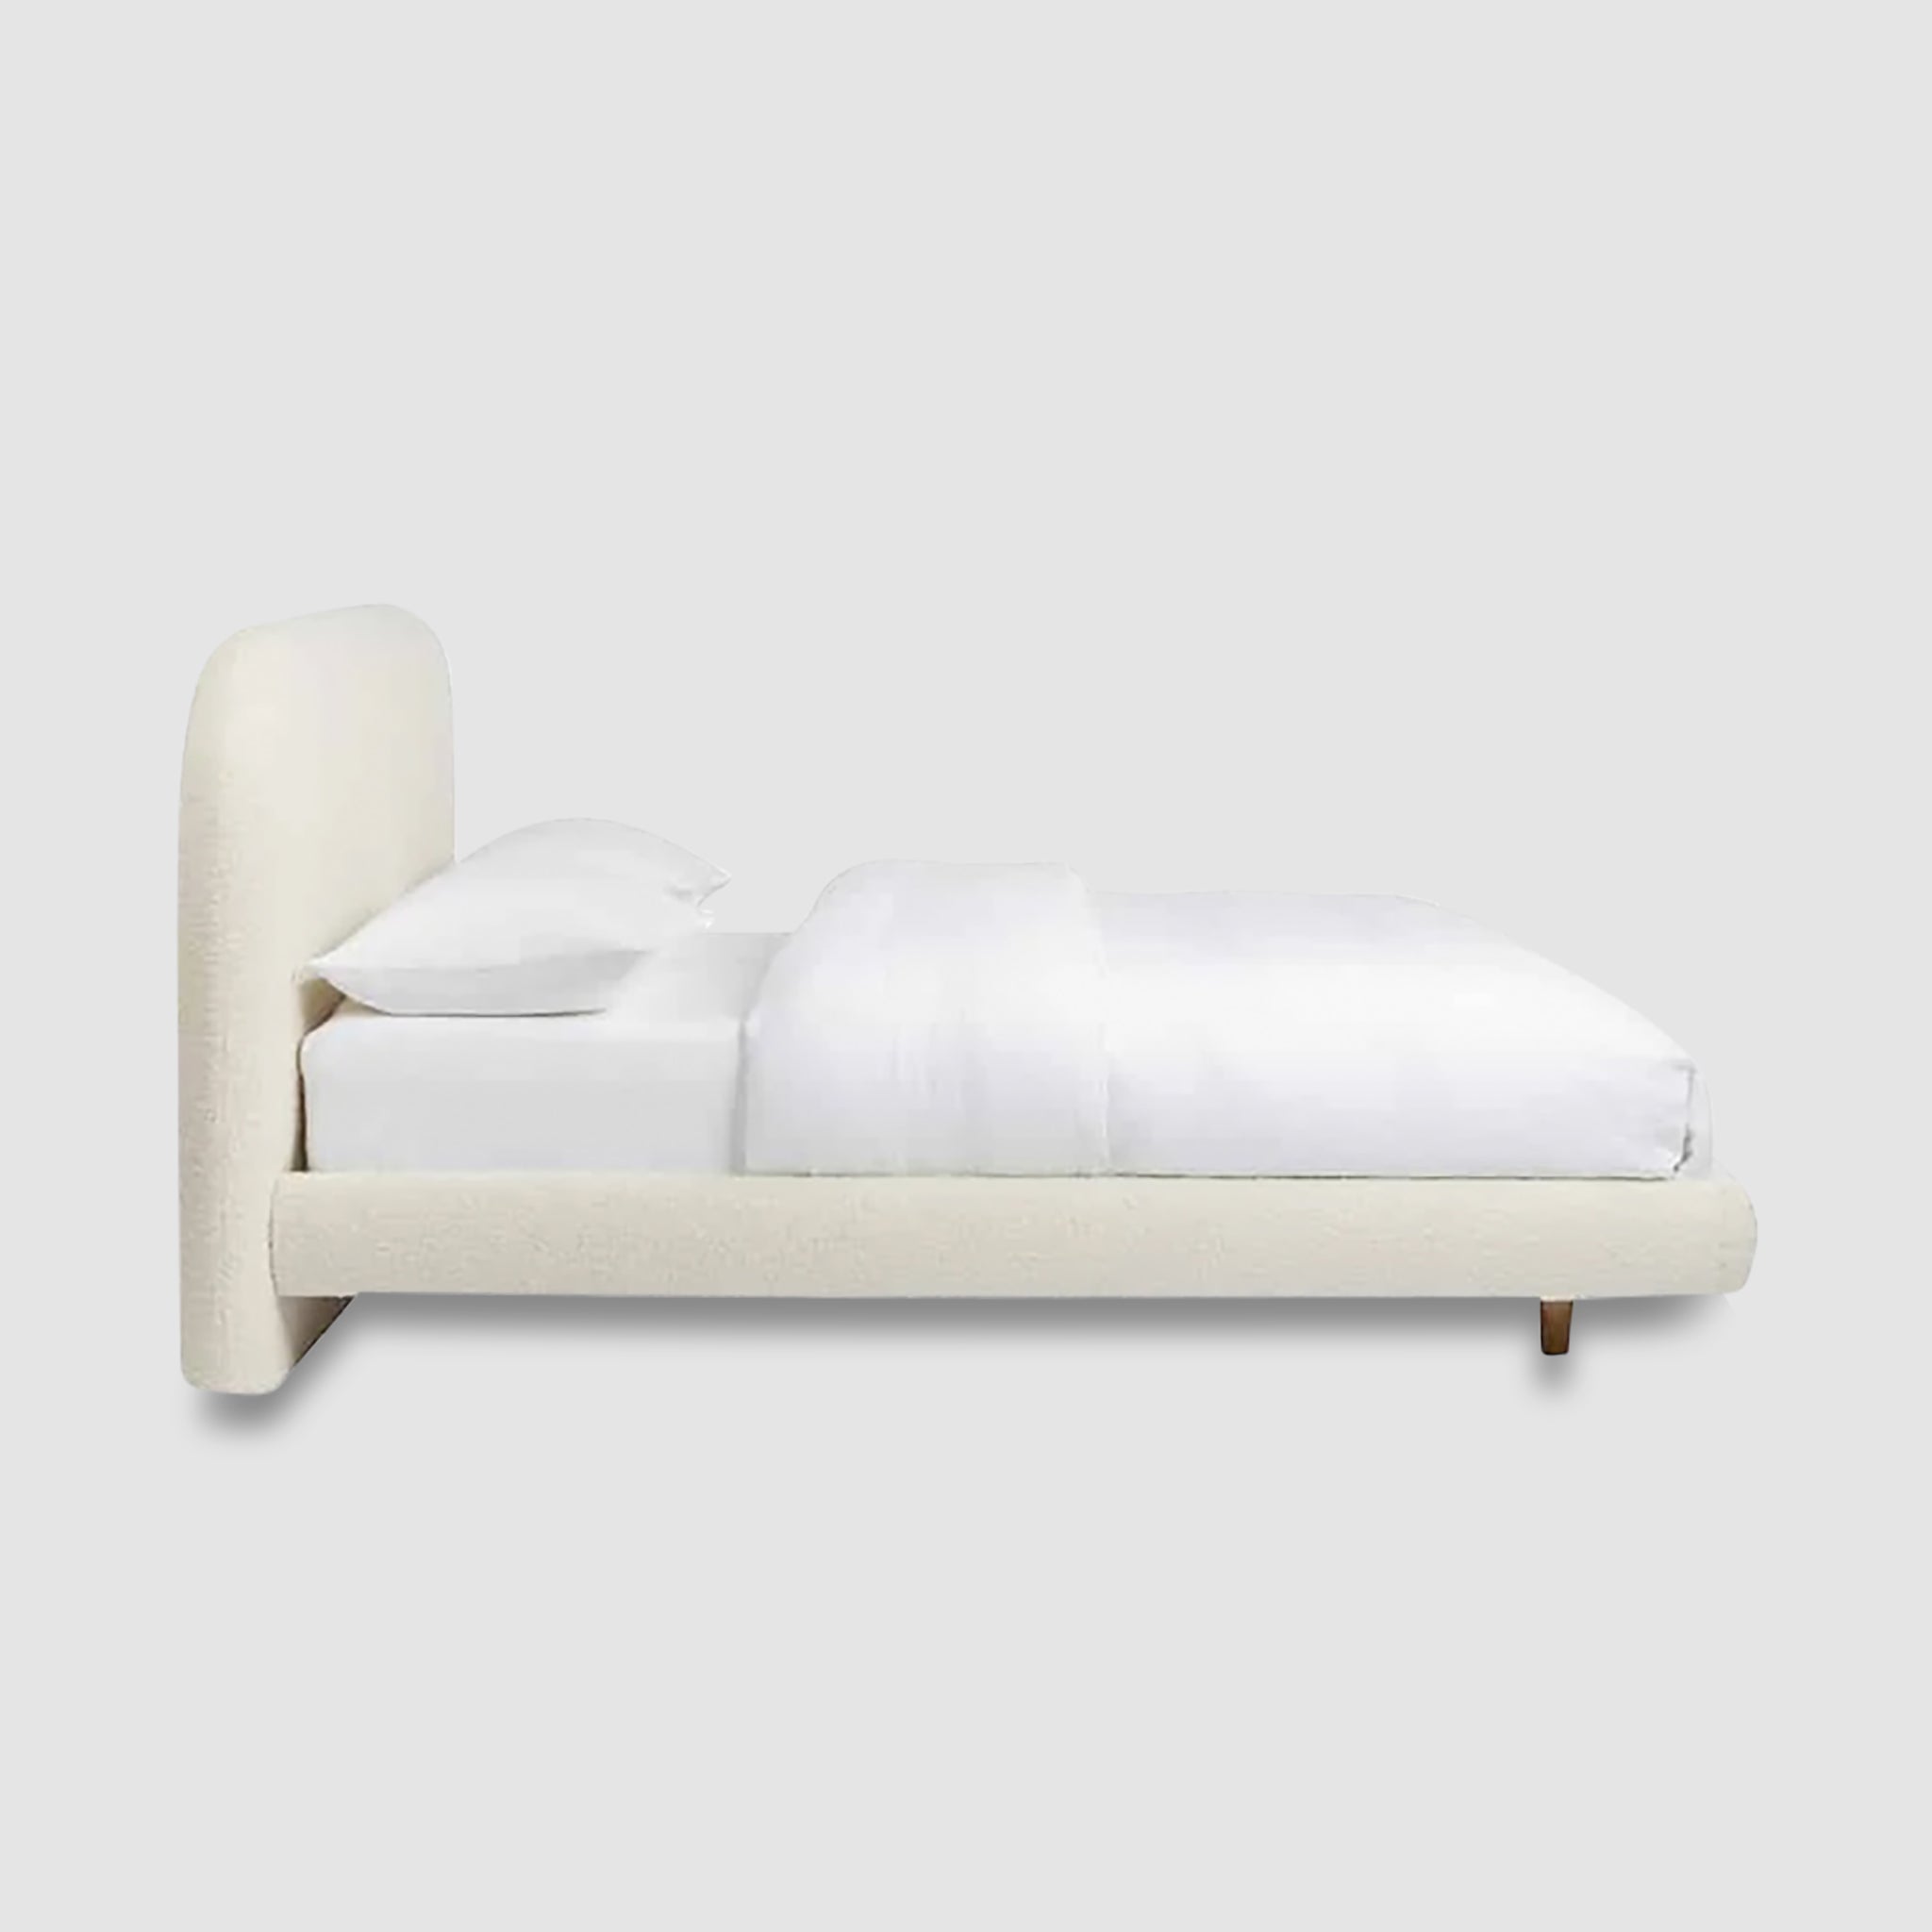 Modern Curved Headboard Bed Frame in White Upholstery